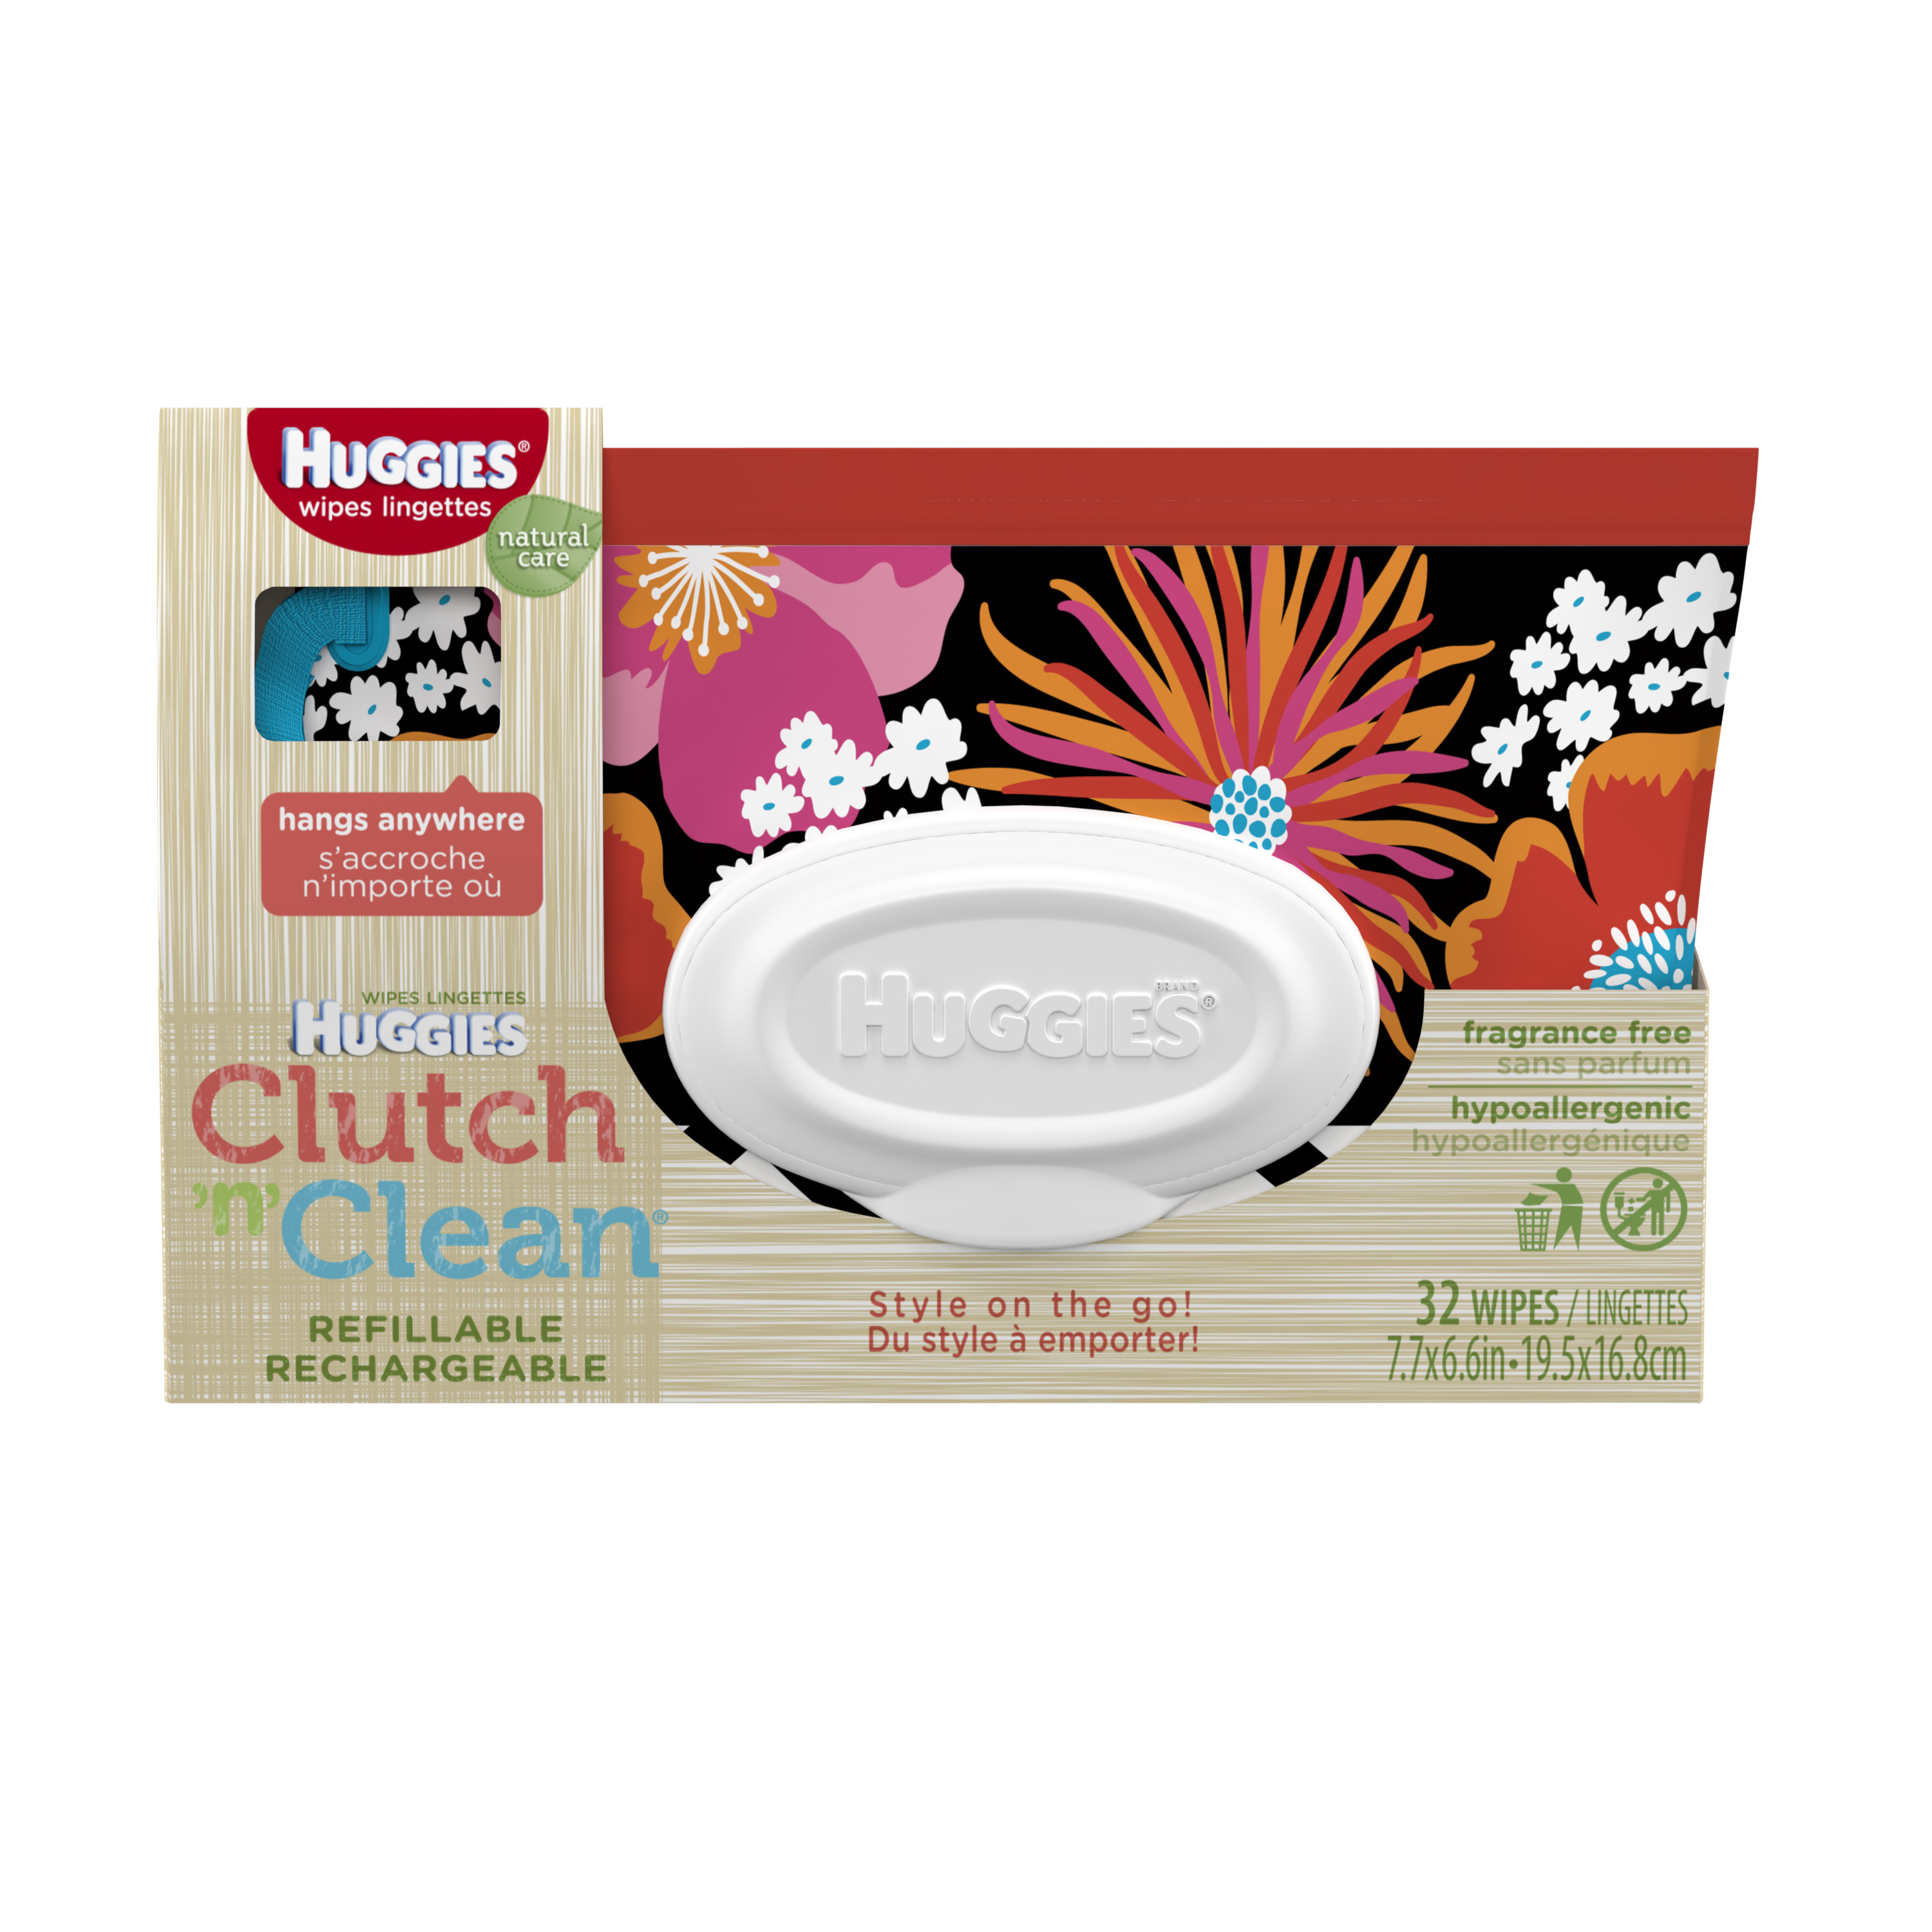 "Huggies Natural Care Clutch n Clean Baby Wipes, Refillable (32 ct)" - image 1 of 10